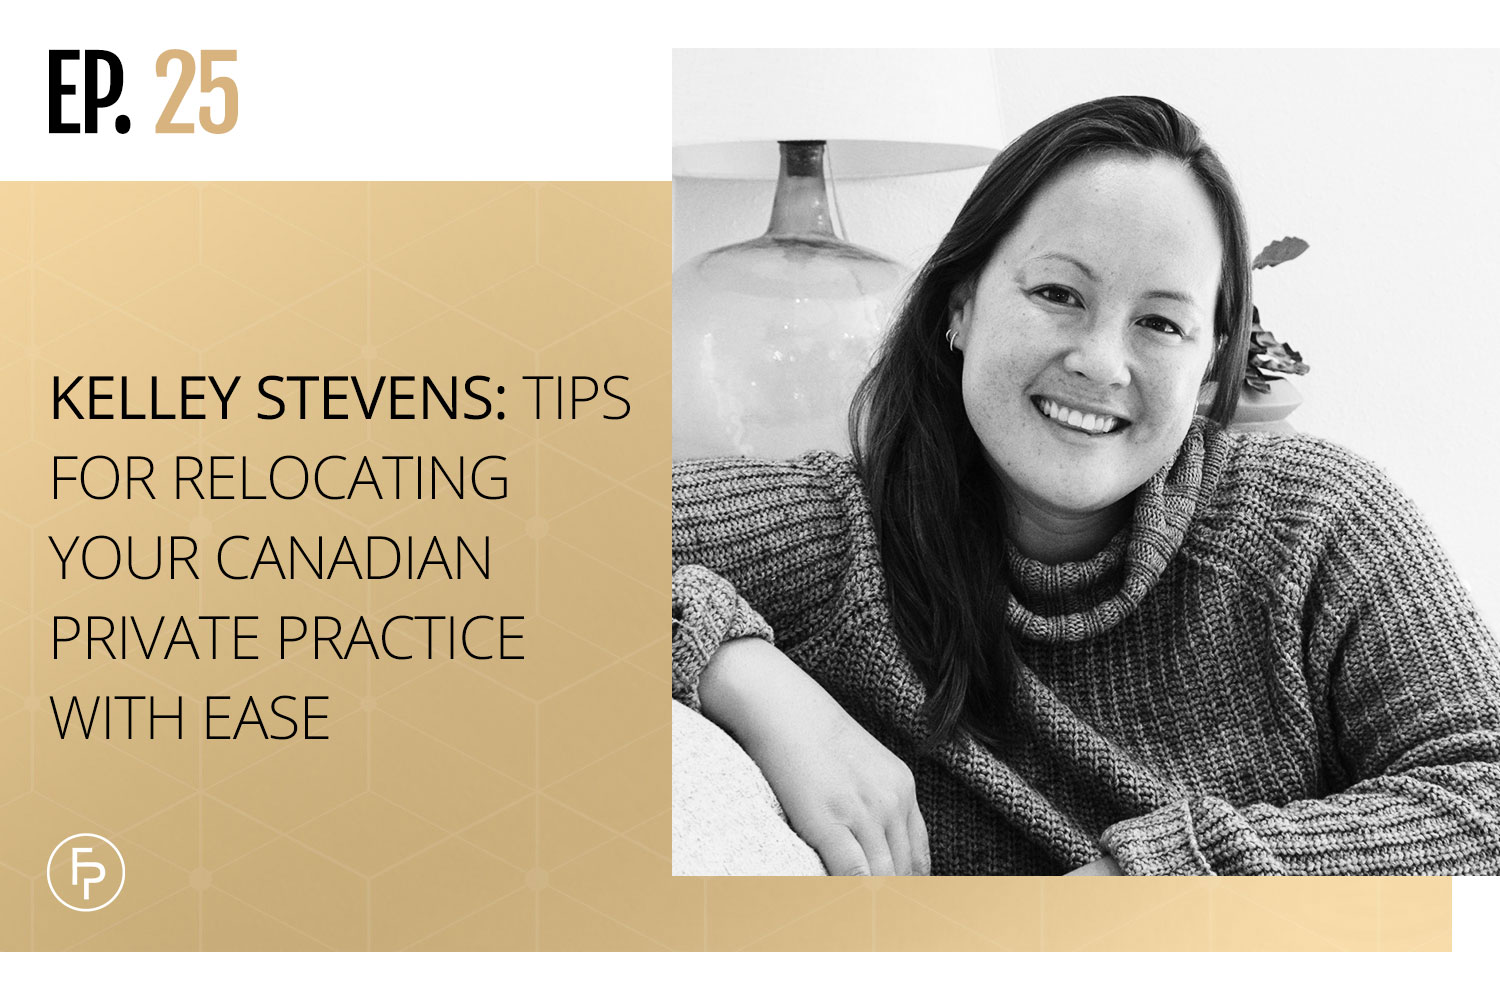 Kelly Stevens: Tips for Relocating Your Canadian Private Practice With Ease | EP 25